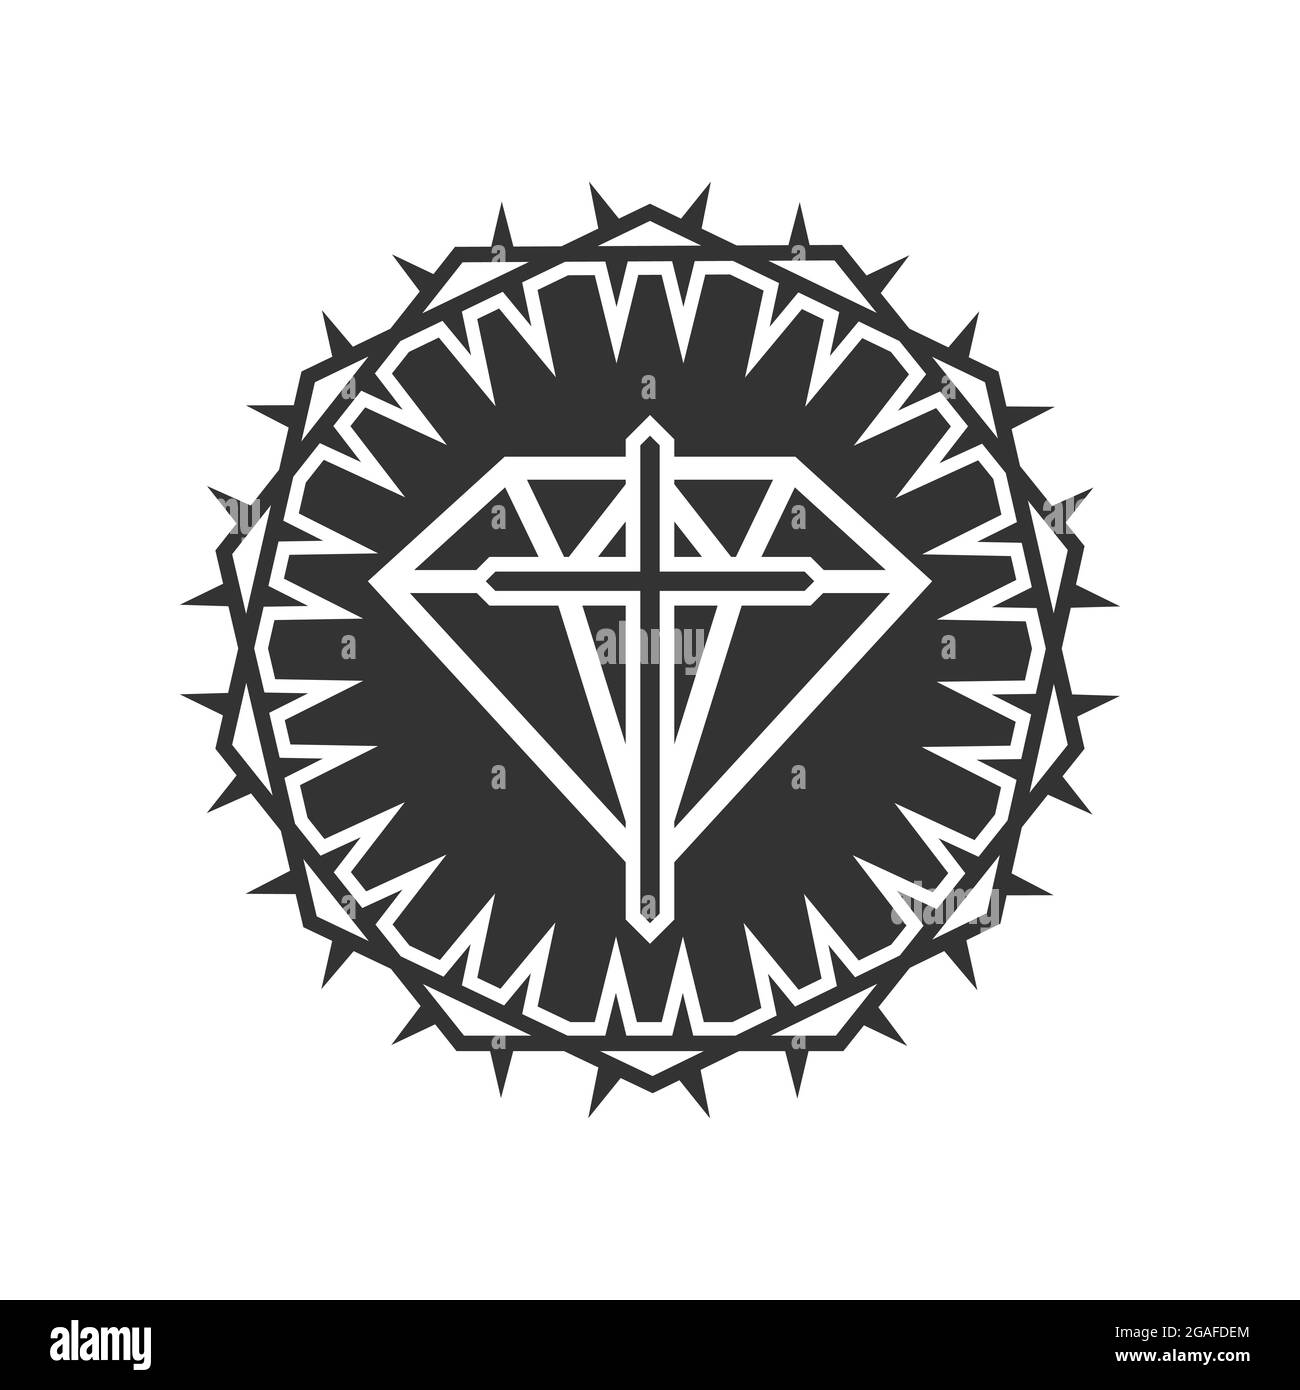 Christian illustration. Church logo. Diamond, cross of Jesus framed with a crown of thorns. Stock Vector